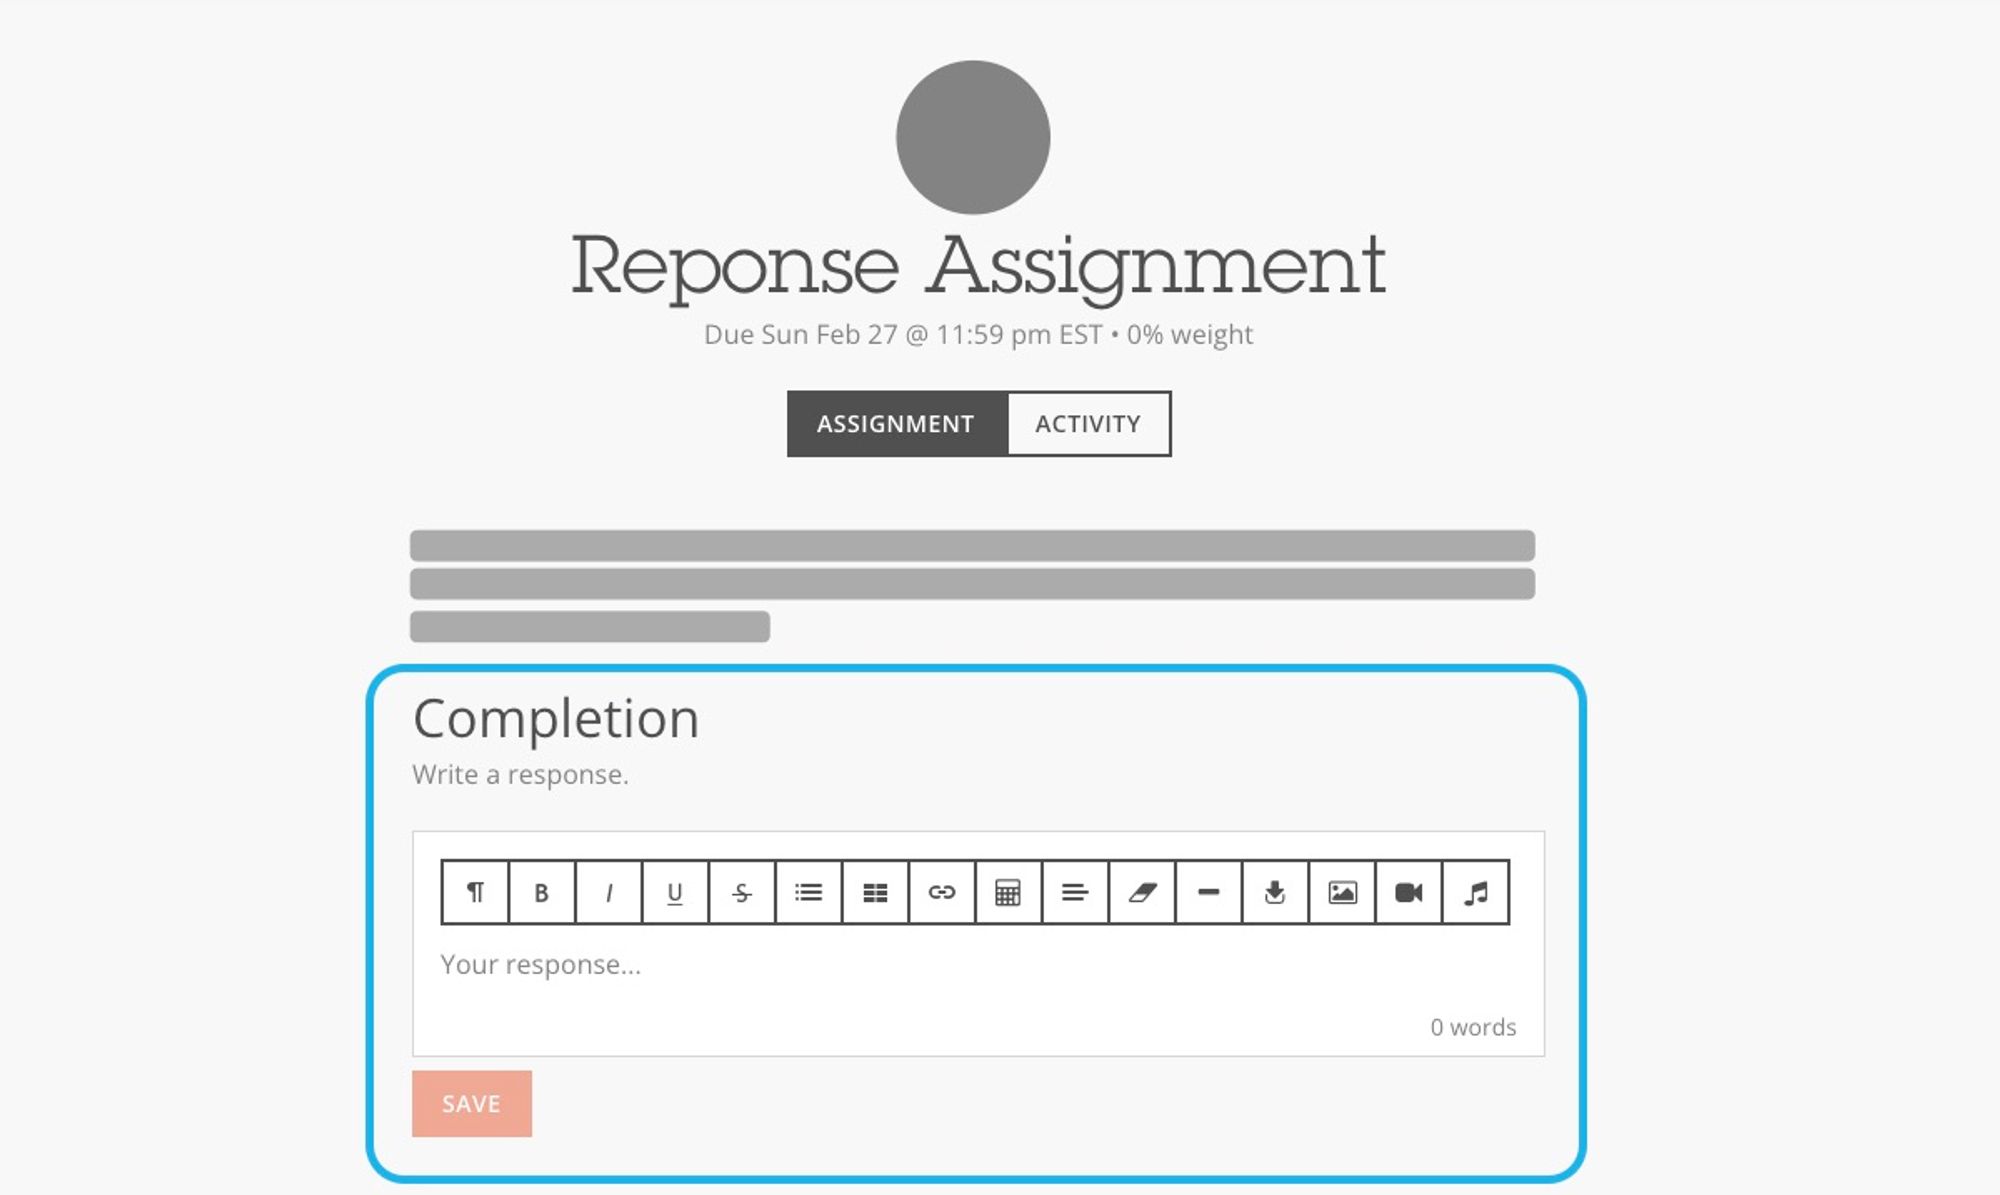 Image of response assignment